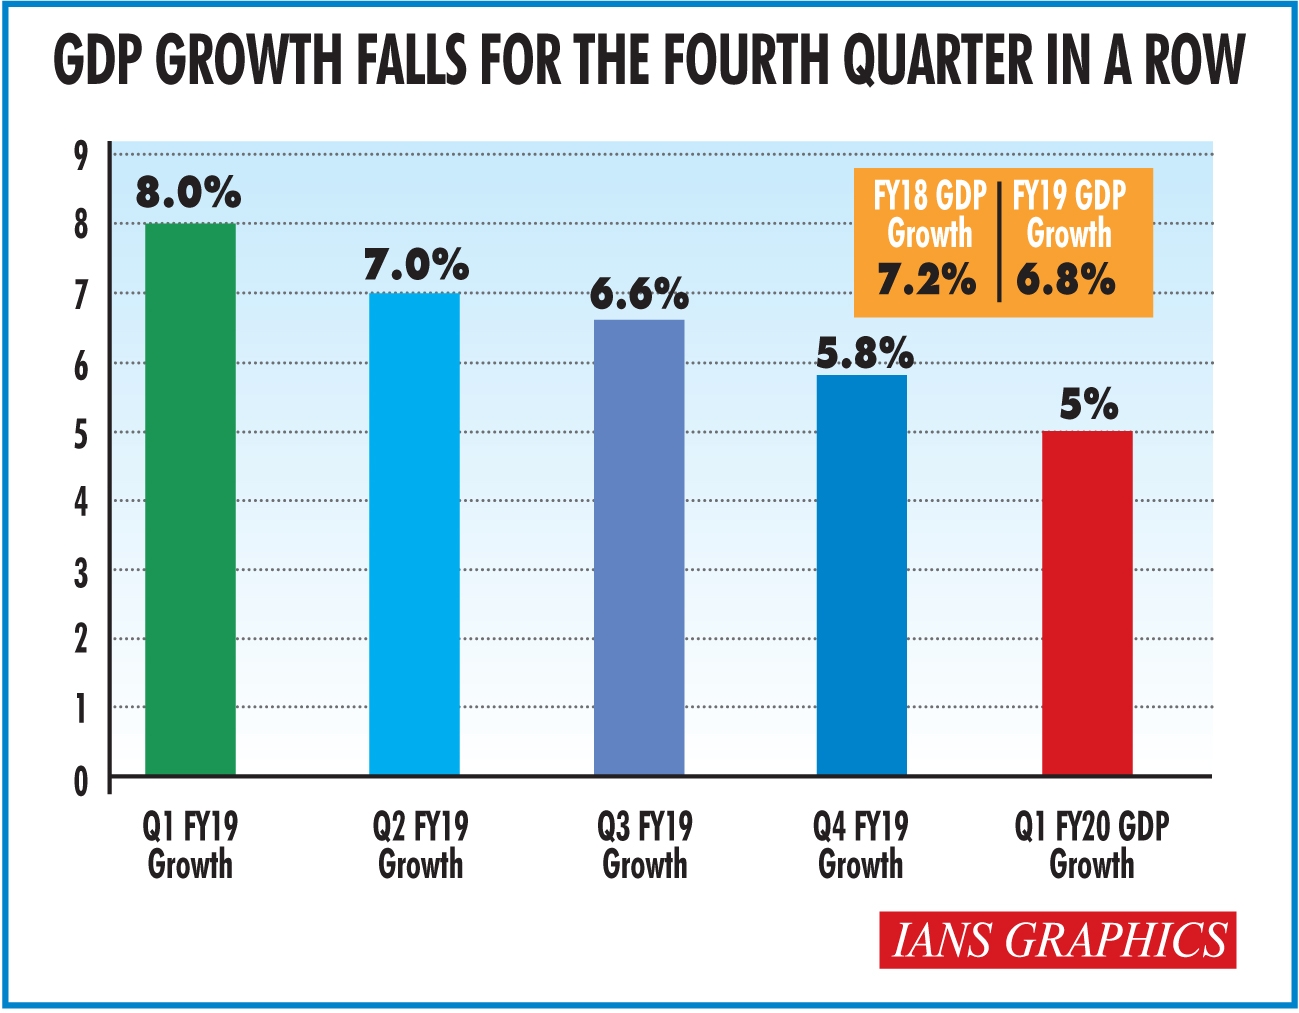 India's Q1 GDP growth at 5 falls to lowest in 6 years